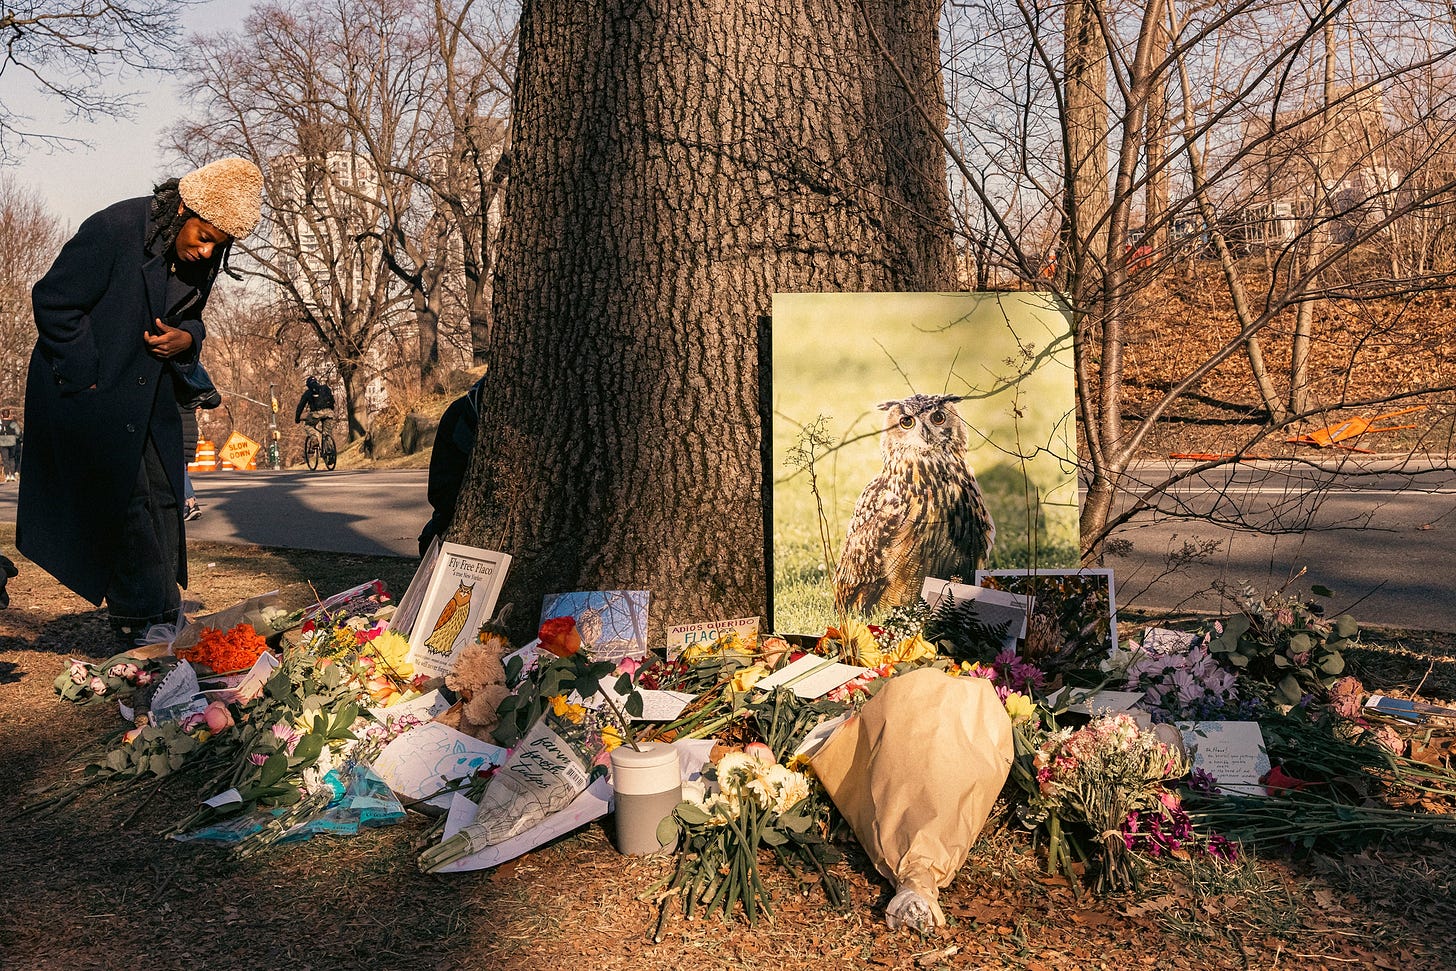 A memorial for Flaco the owl in Central Park New York.